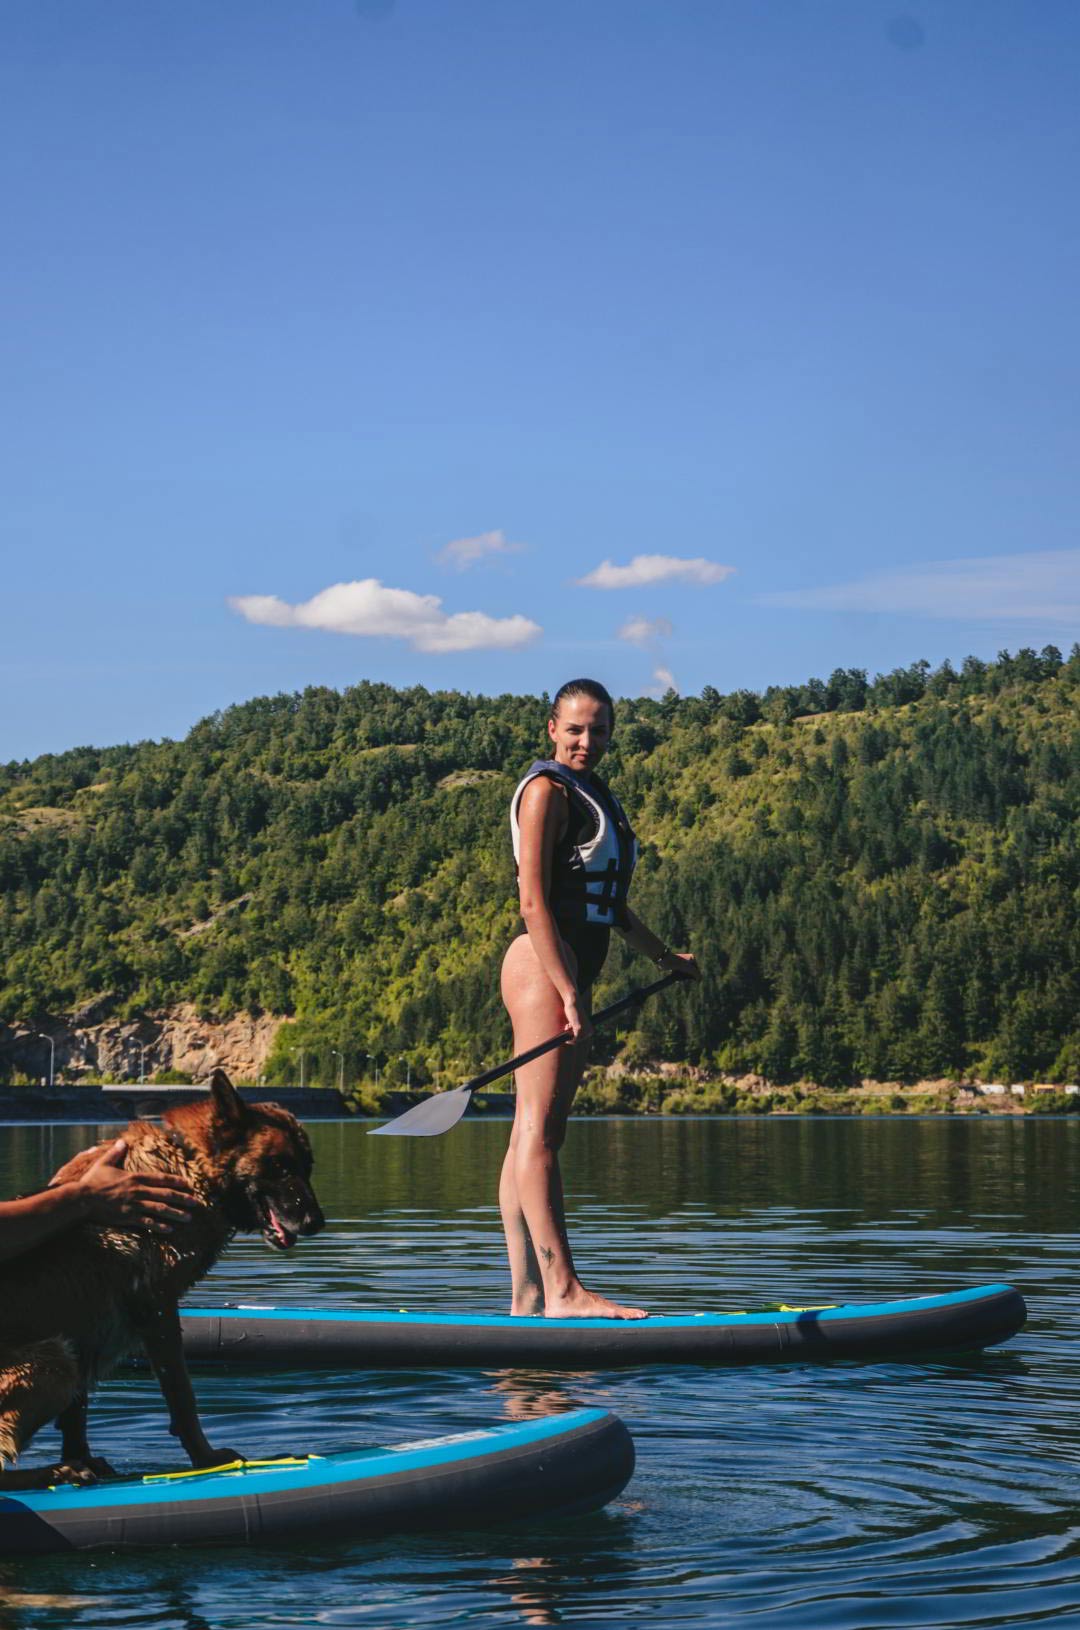 Dog and girl on a paddleboard.